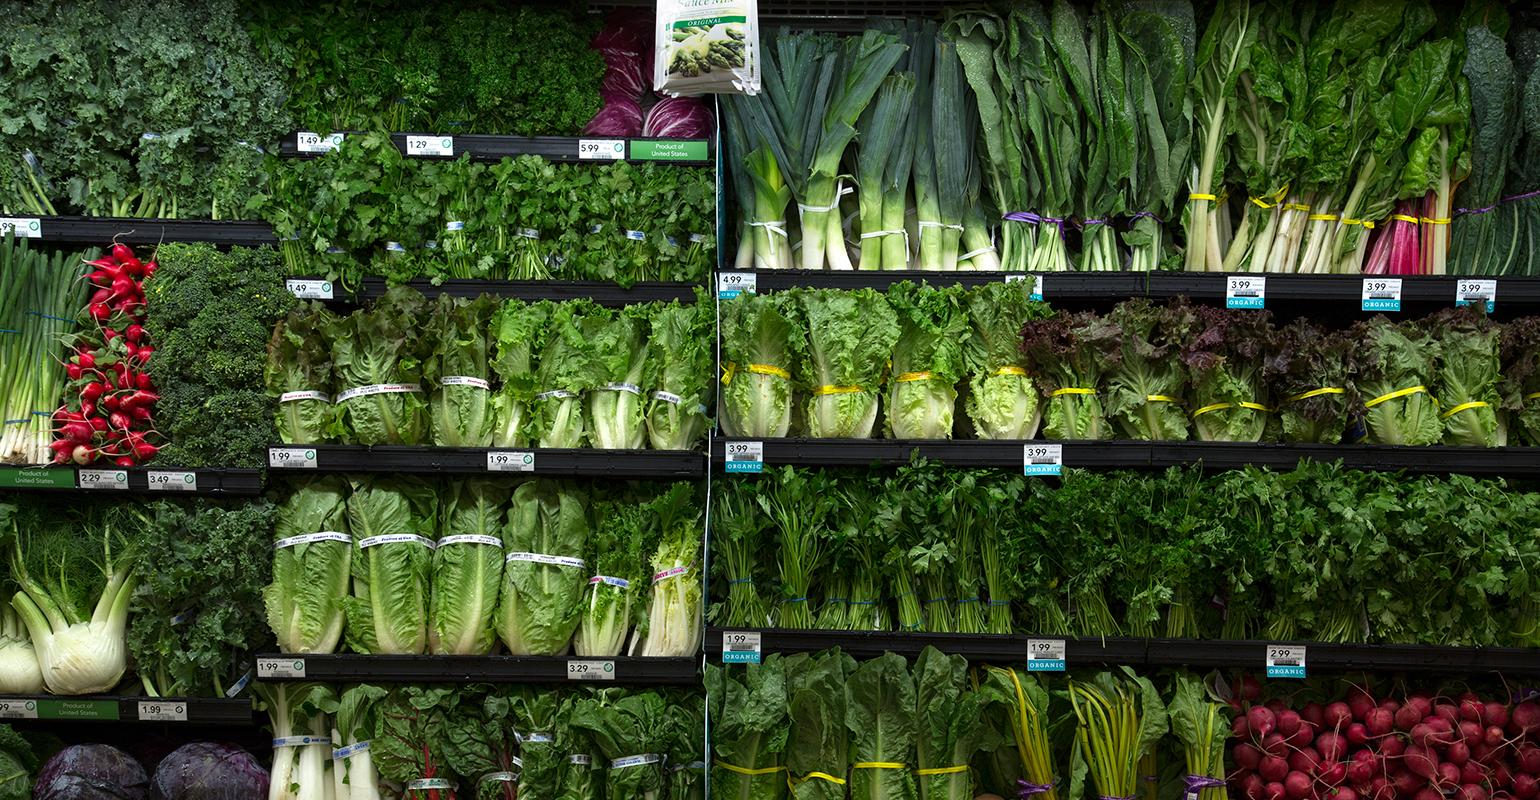 Leafy green grocery